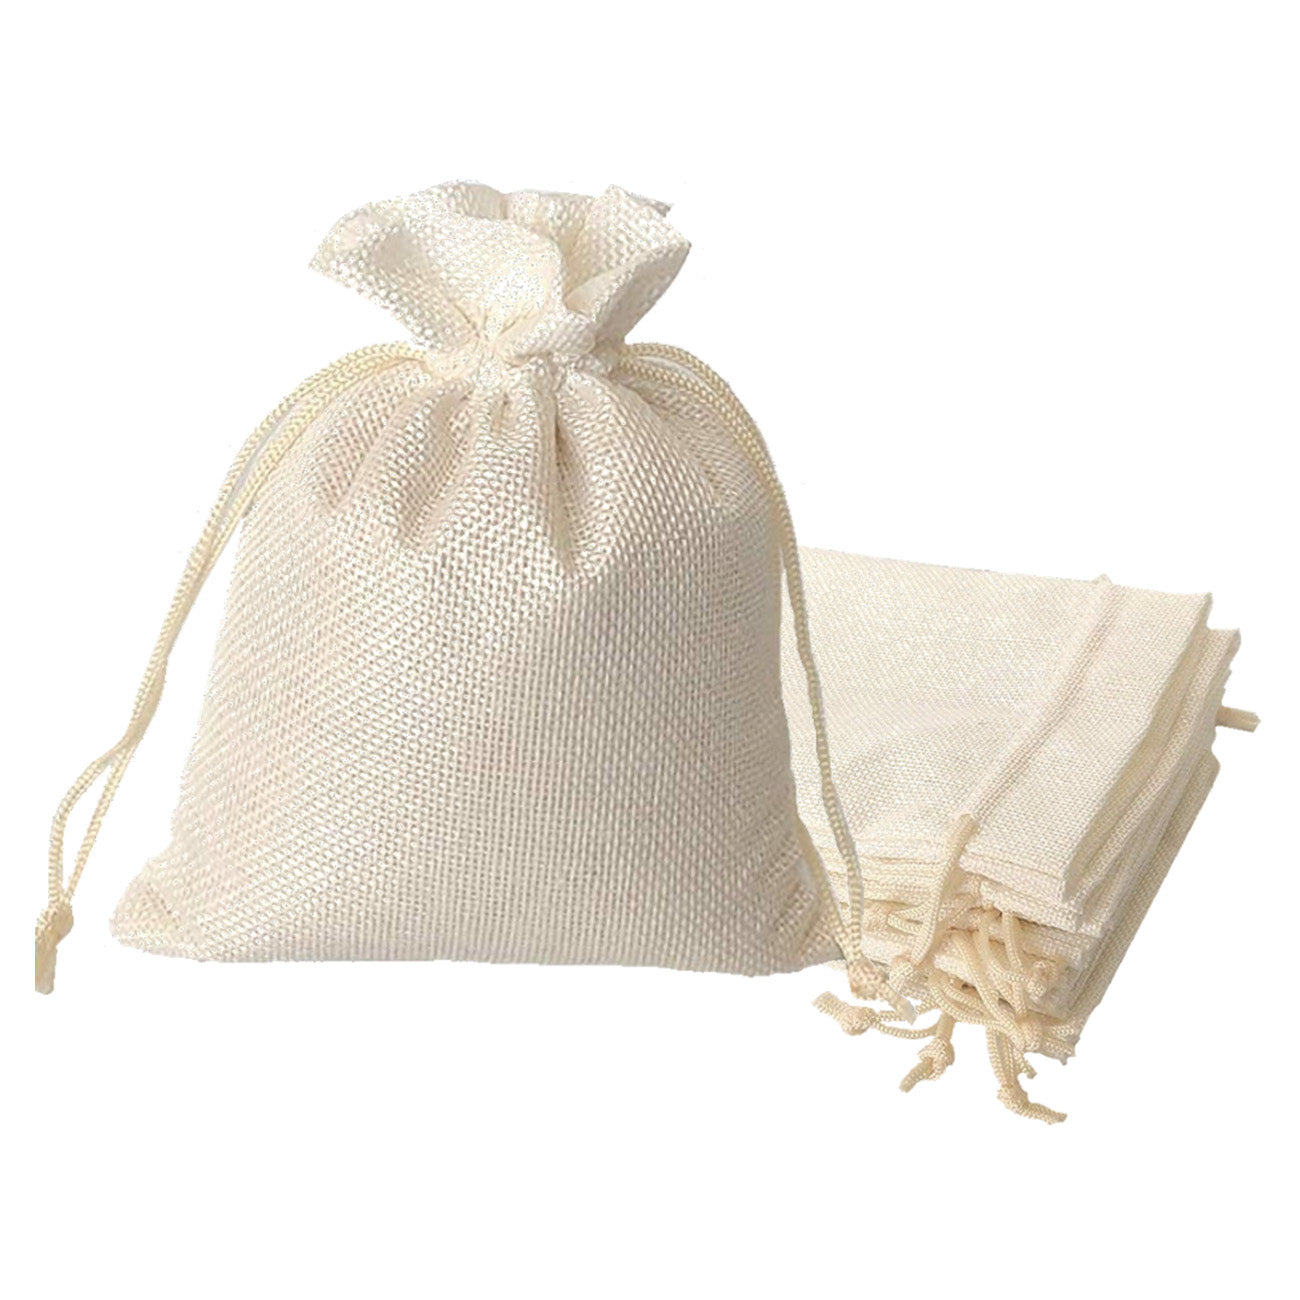 Jute Linen Pouches for Functions, Baby Showers, Candy Bags - Cream Color LifeKrafts